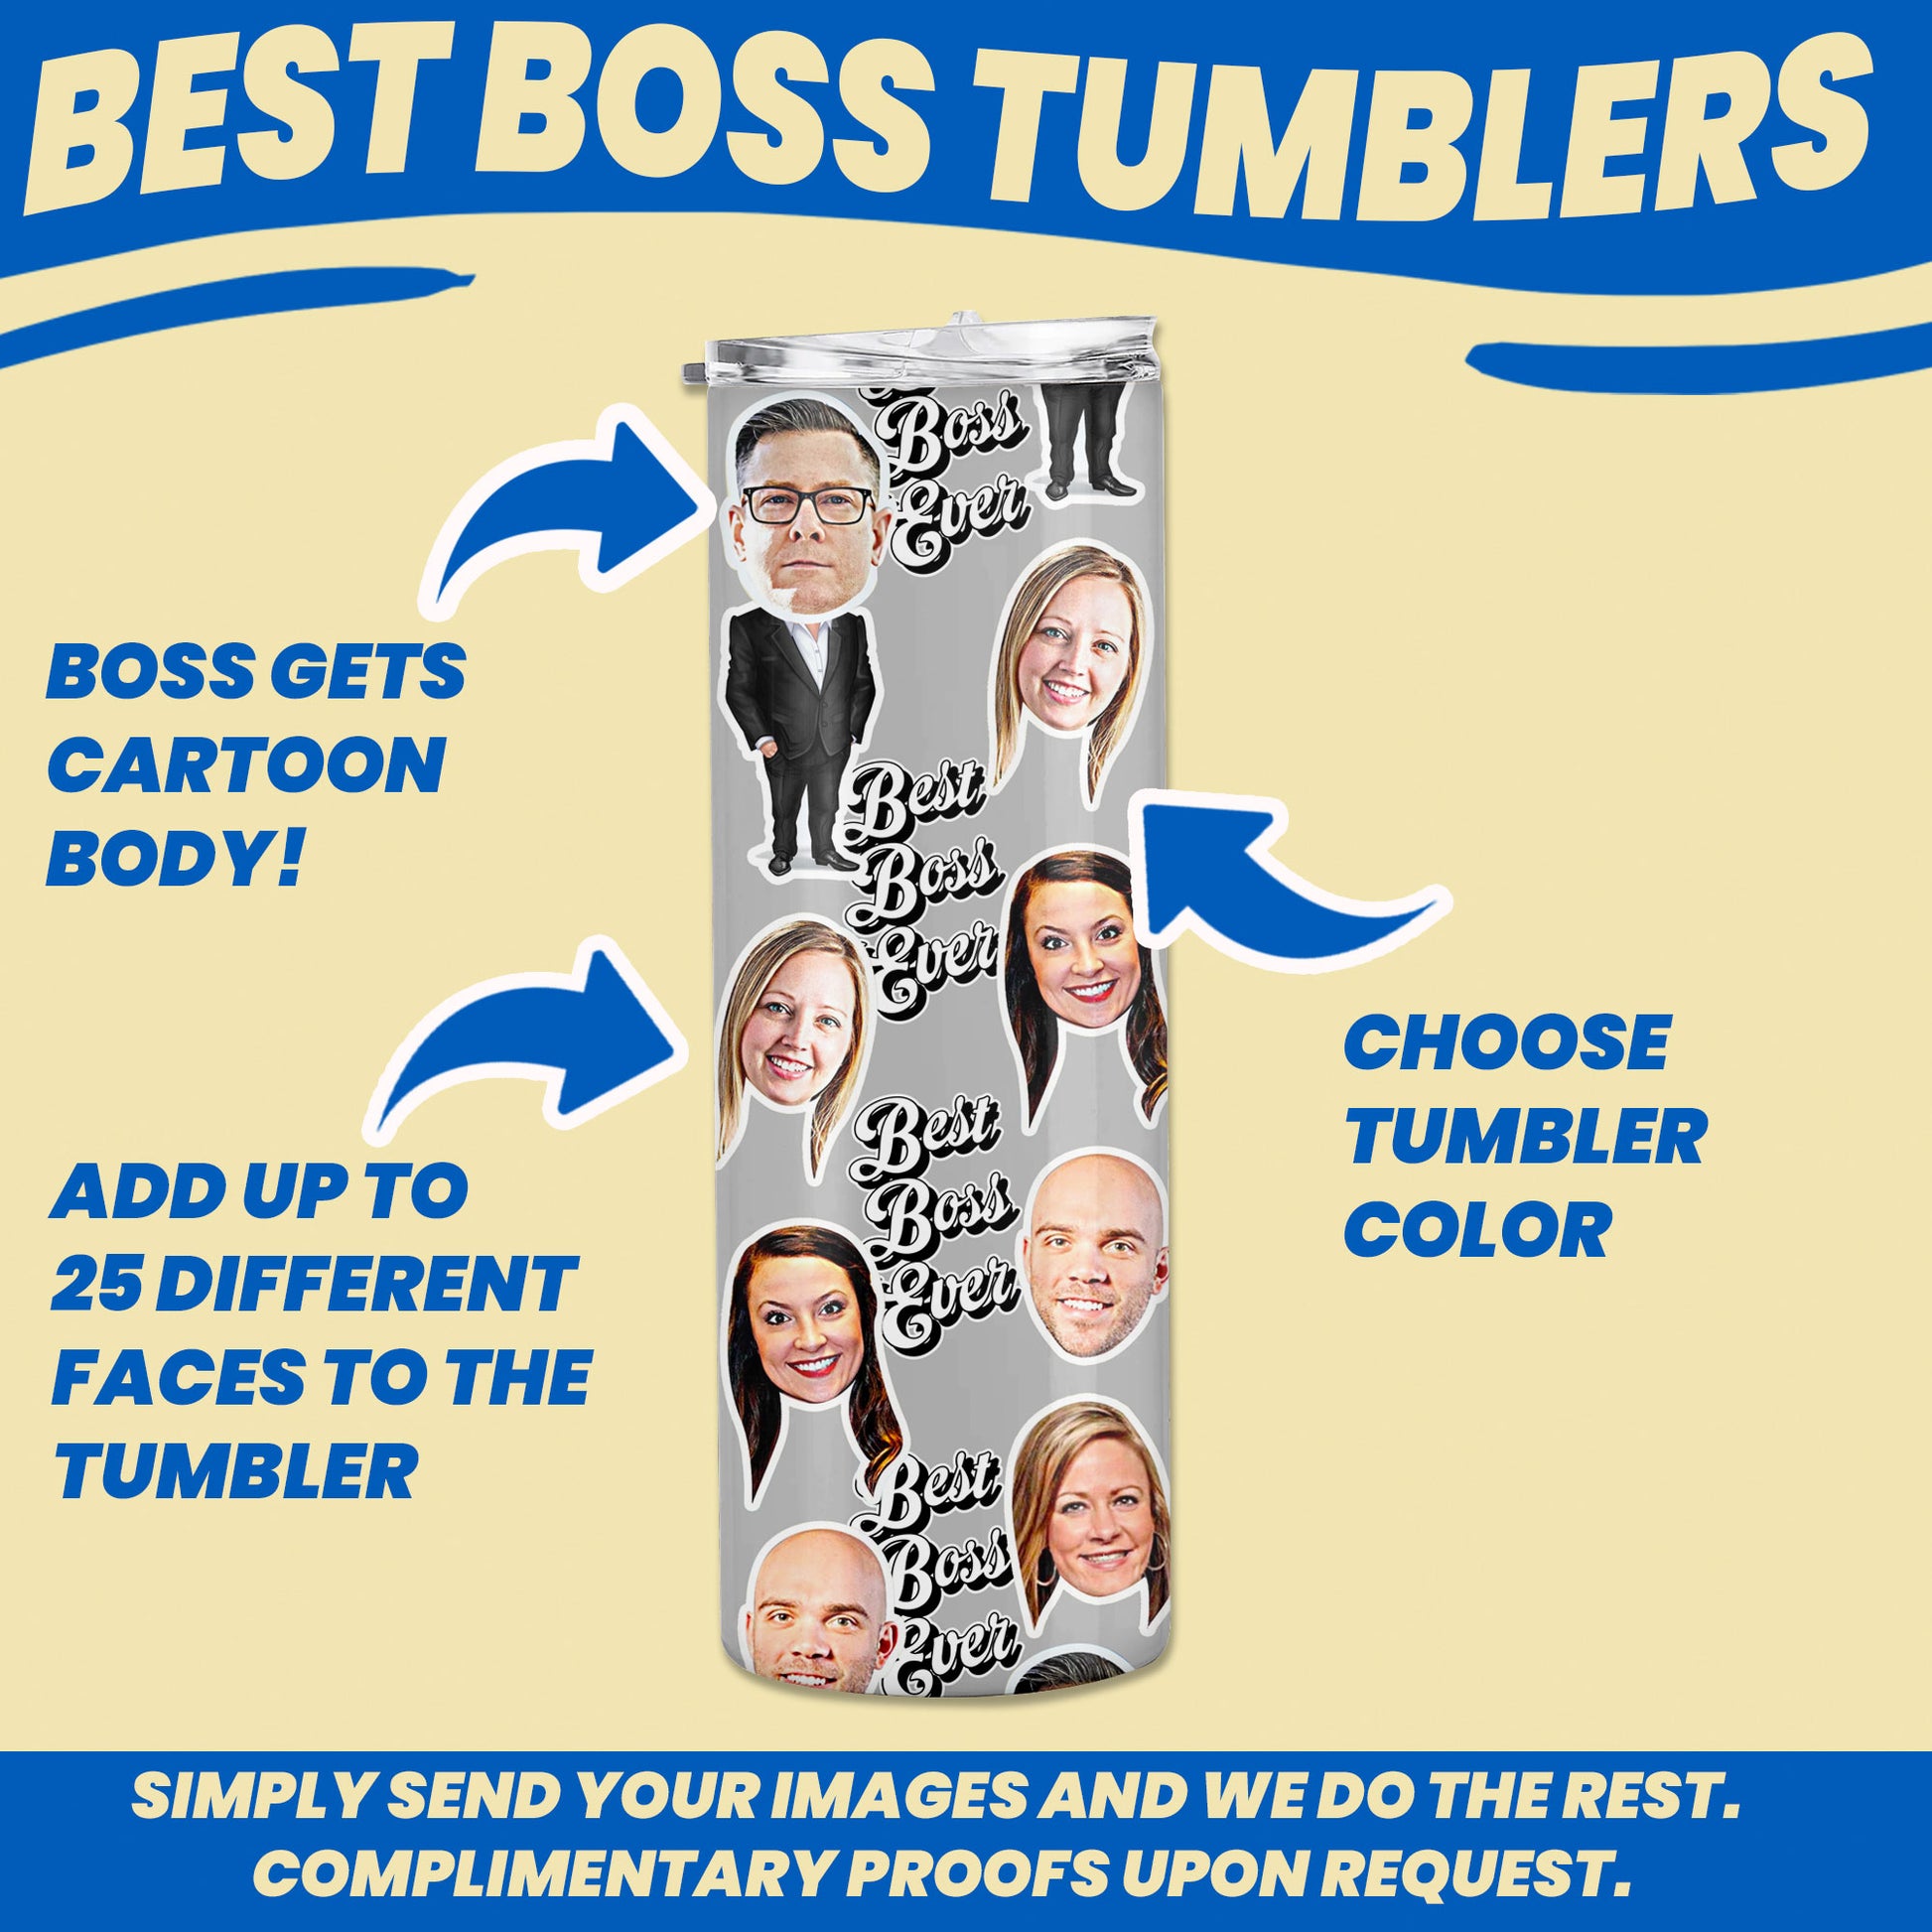 Personalized boss gift tumblers with faces customization options such as 25 different faces, tumbler colors & text personalization